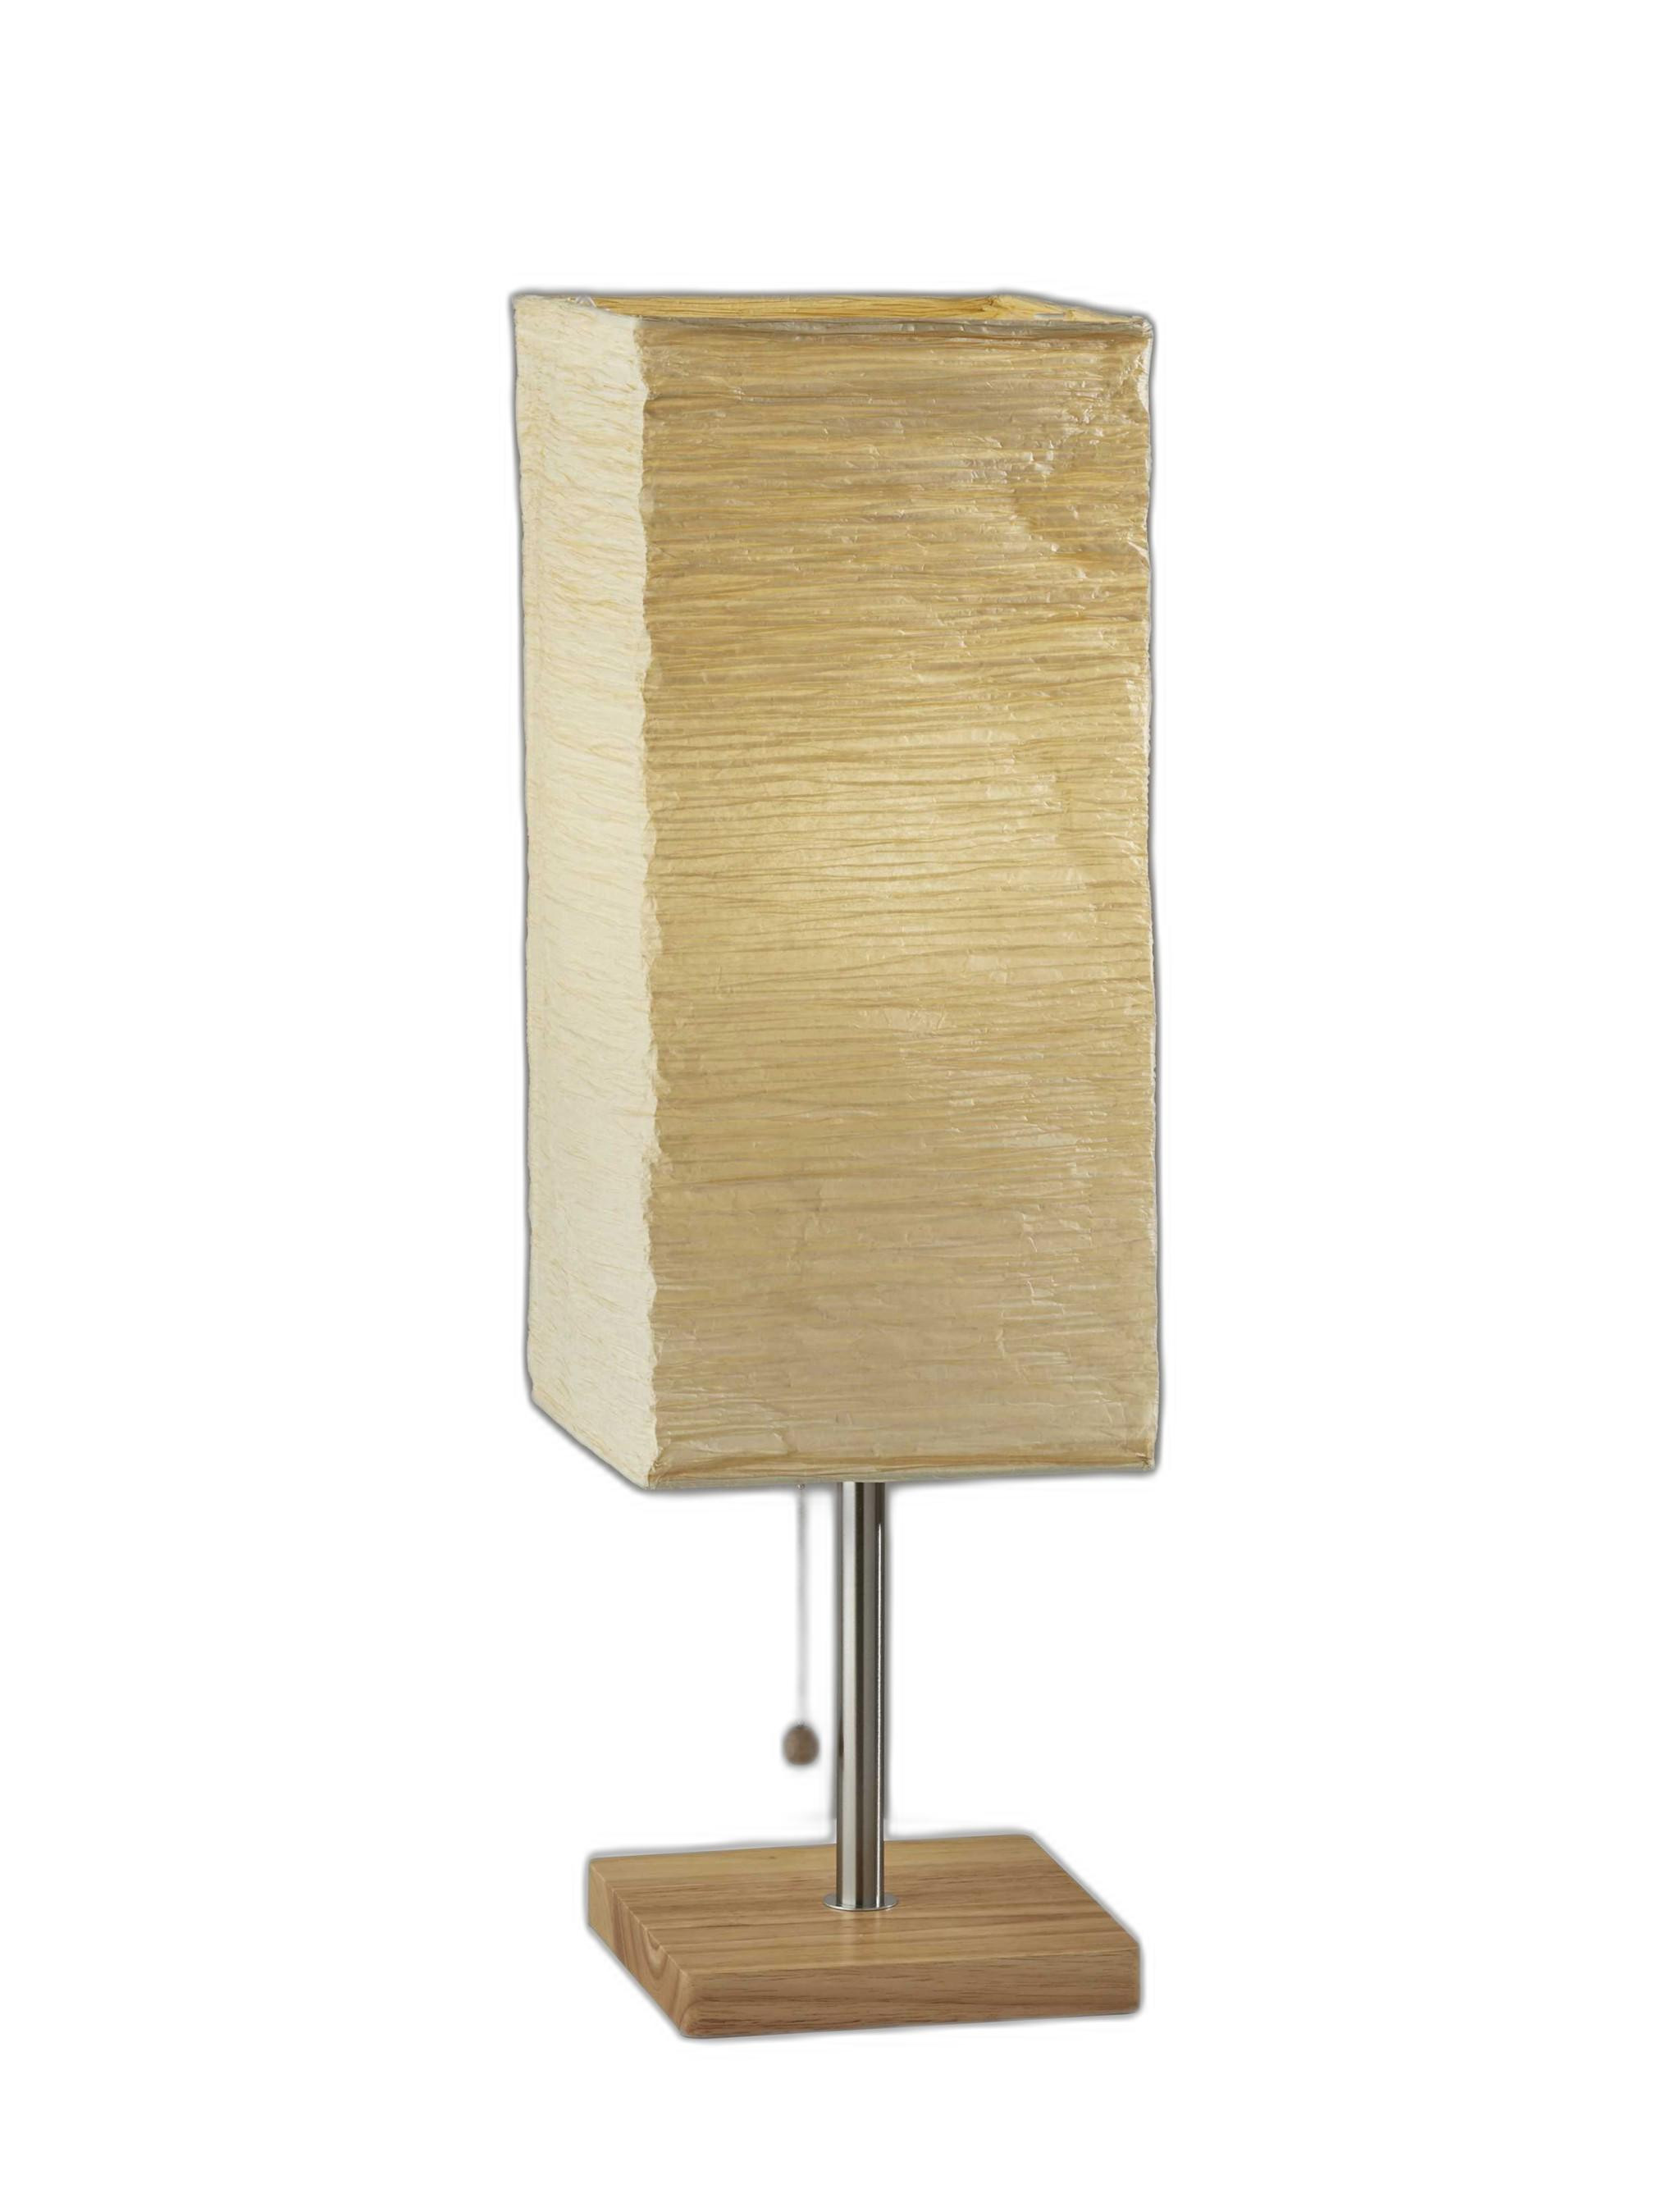 Wildside Paper Shade With Natural Wood Table Lamp-372819-1